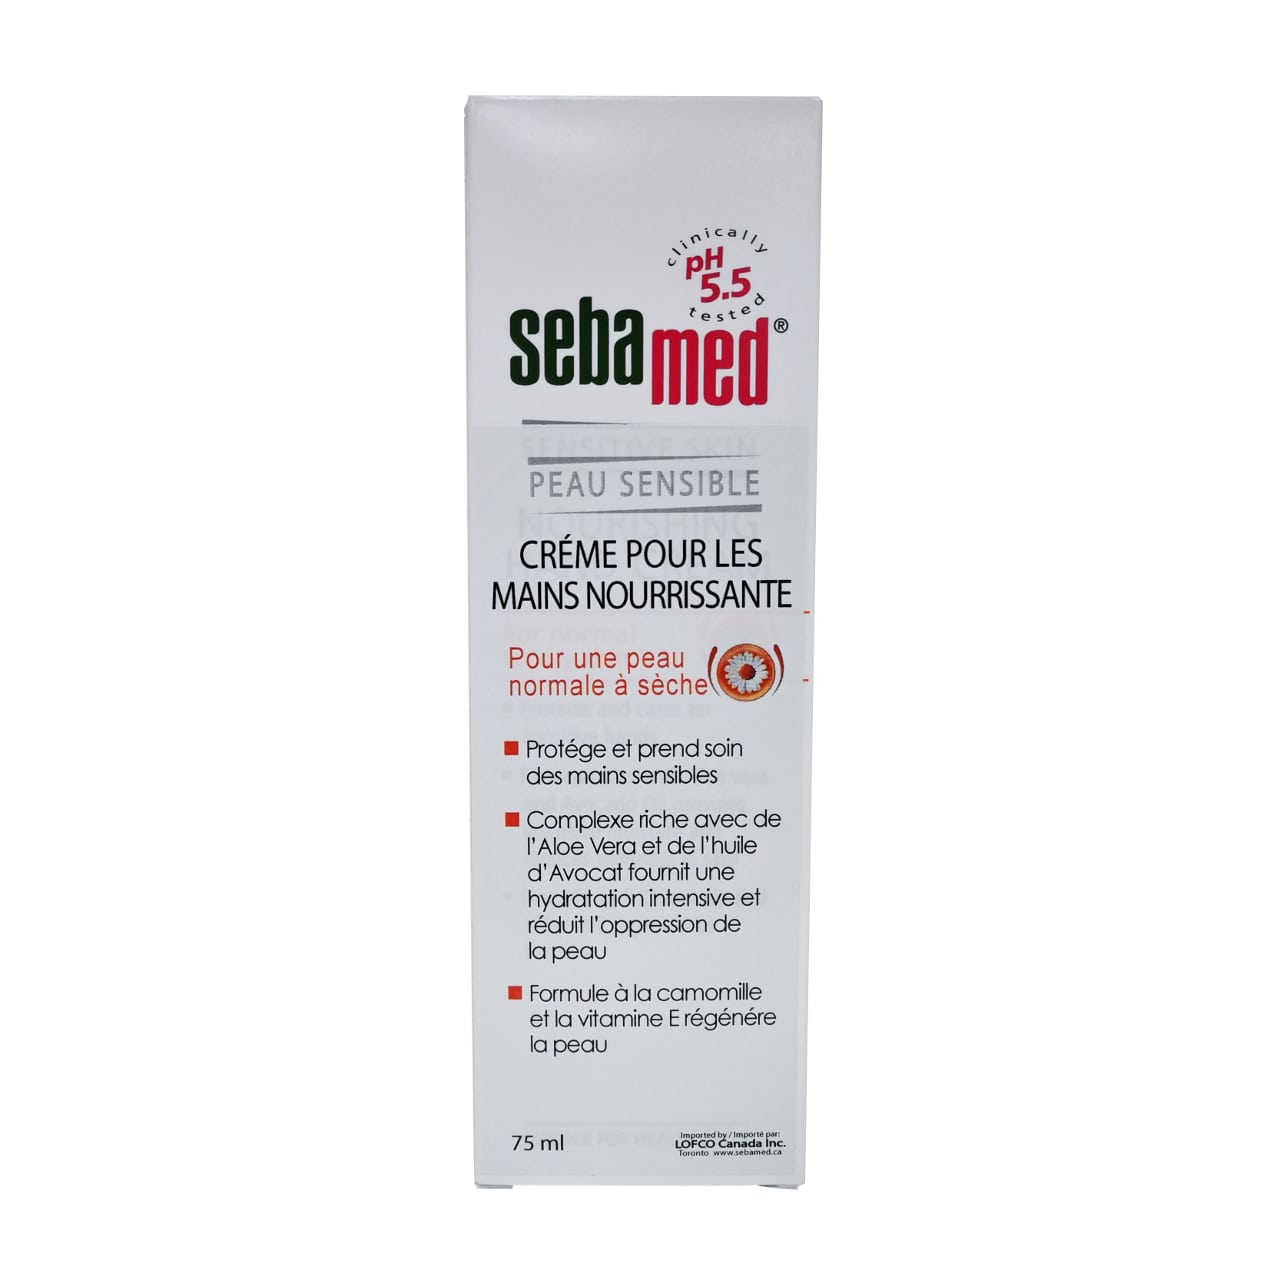 Product label for Sebamed Nourishing Hand Cream in French